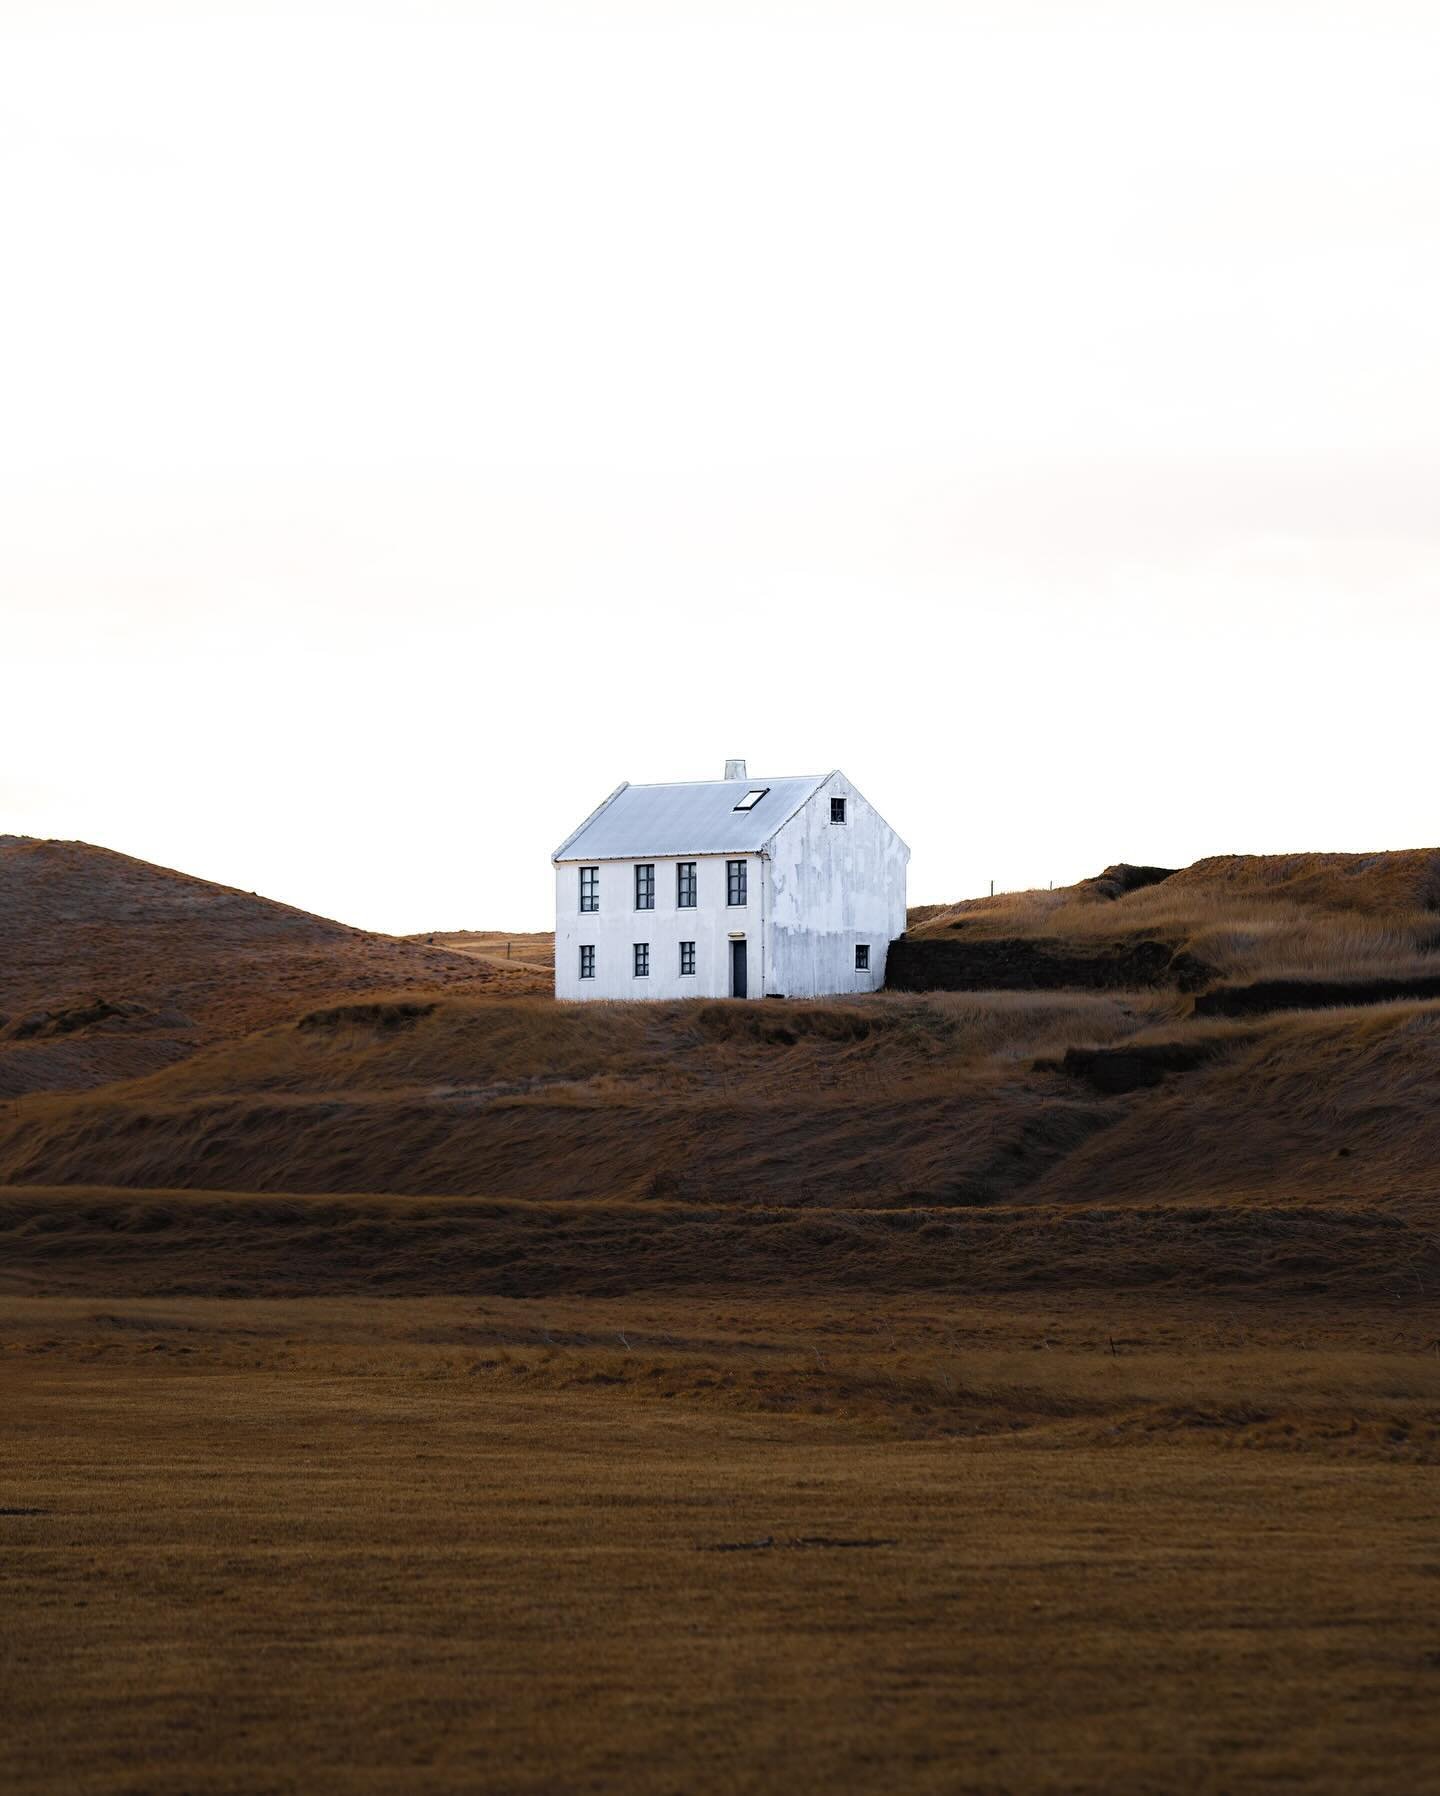 The hill top // Highland homes, and highland horses. Can&rsquo;t get enough of the rich tones Iceland has to offer. Right down to the hidden gems. 

#icelandtravel #icelandscape #icelandtrip #icelandhighlands #icelandhorse #icelandhorses #icelandadve